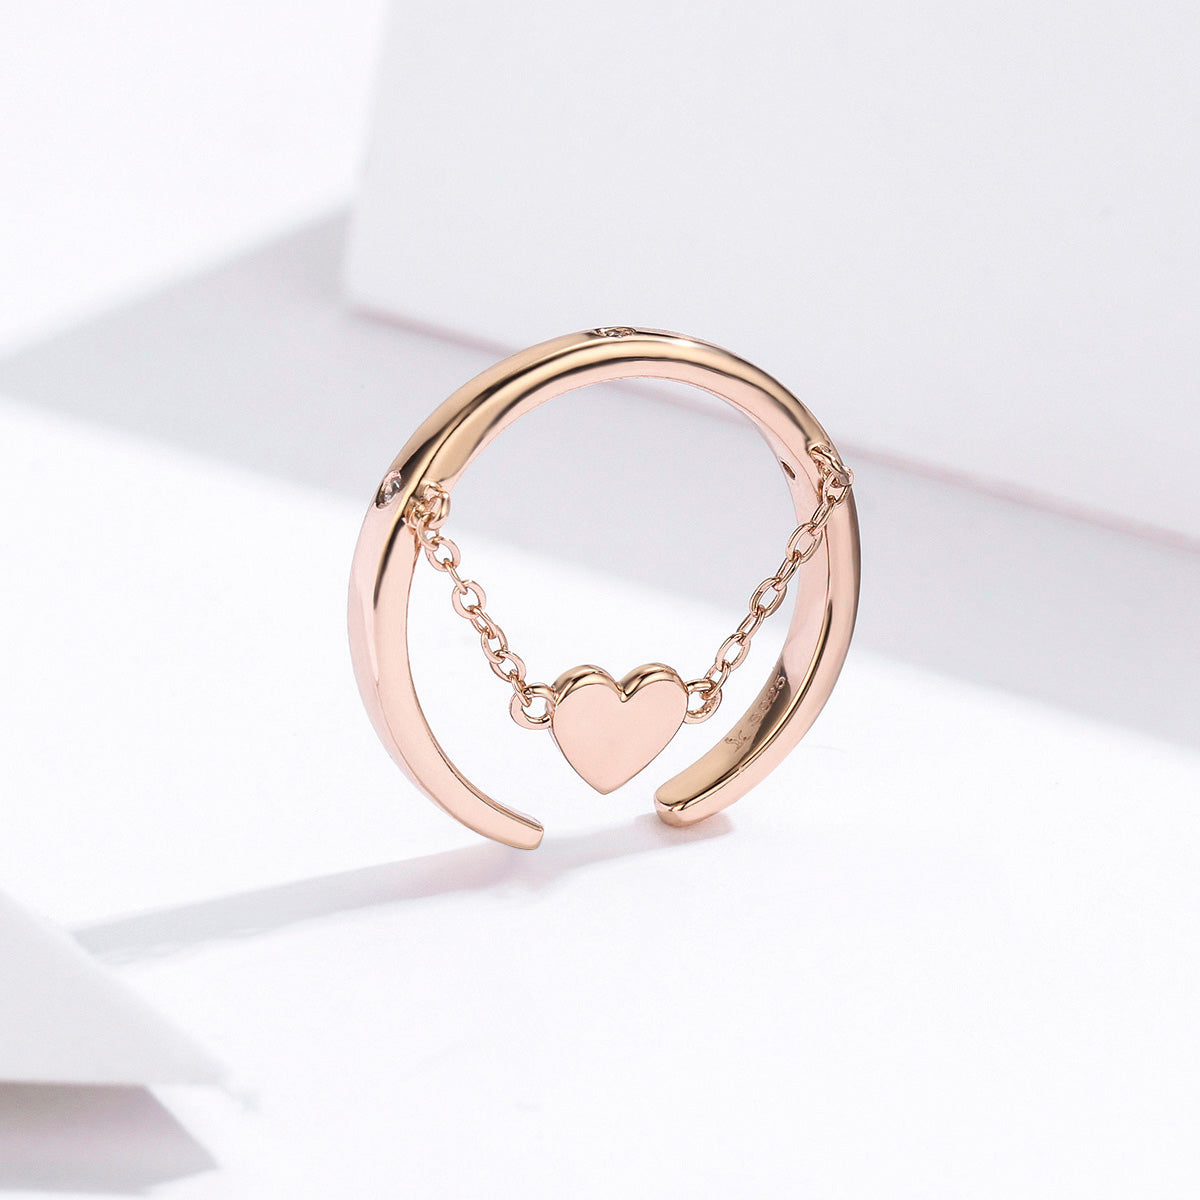 S925 sterling silver love ring rose gold plated cubic zirconia heart ring